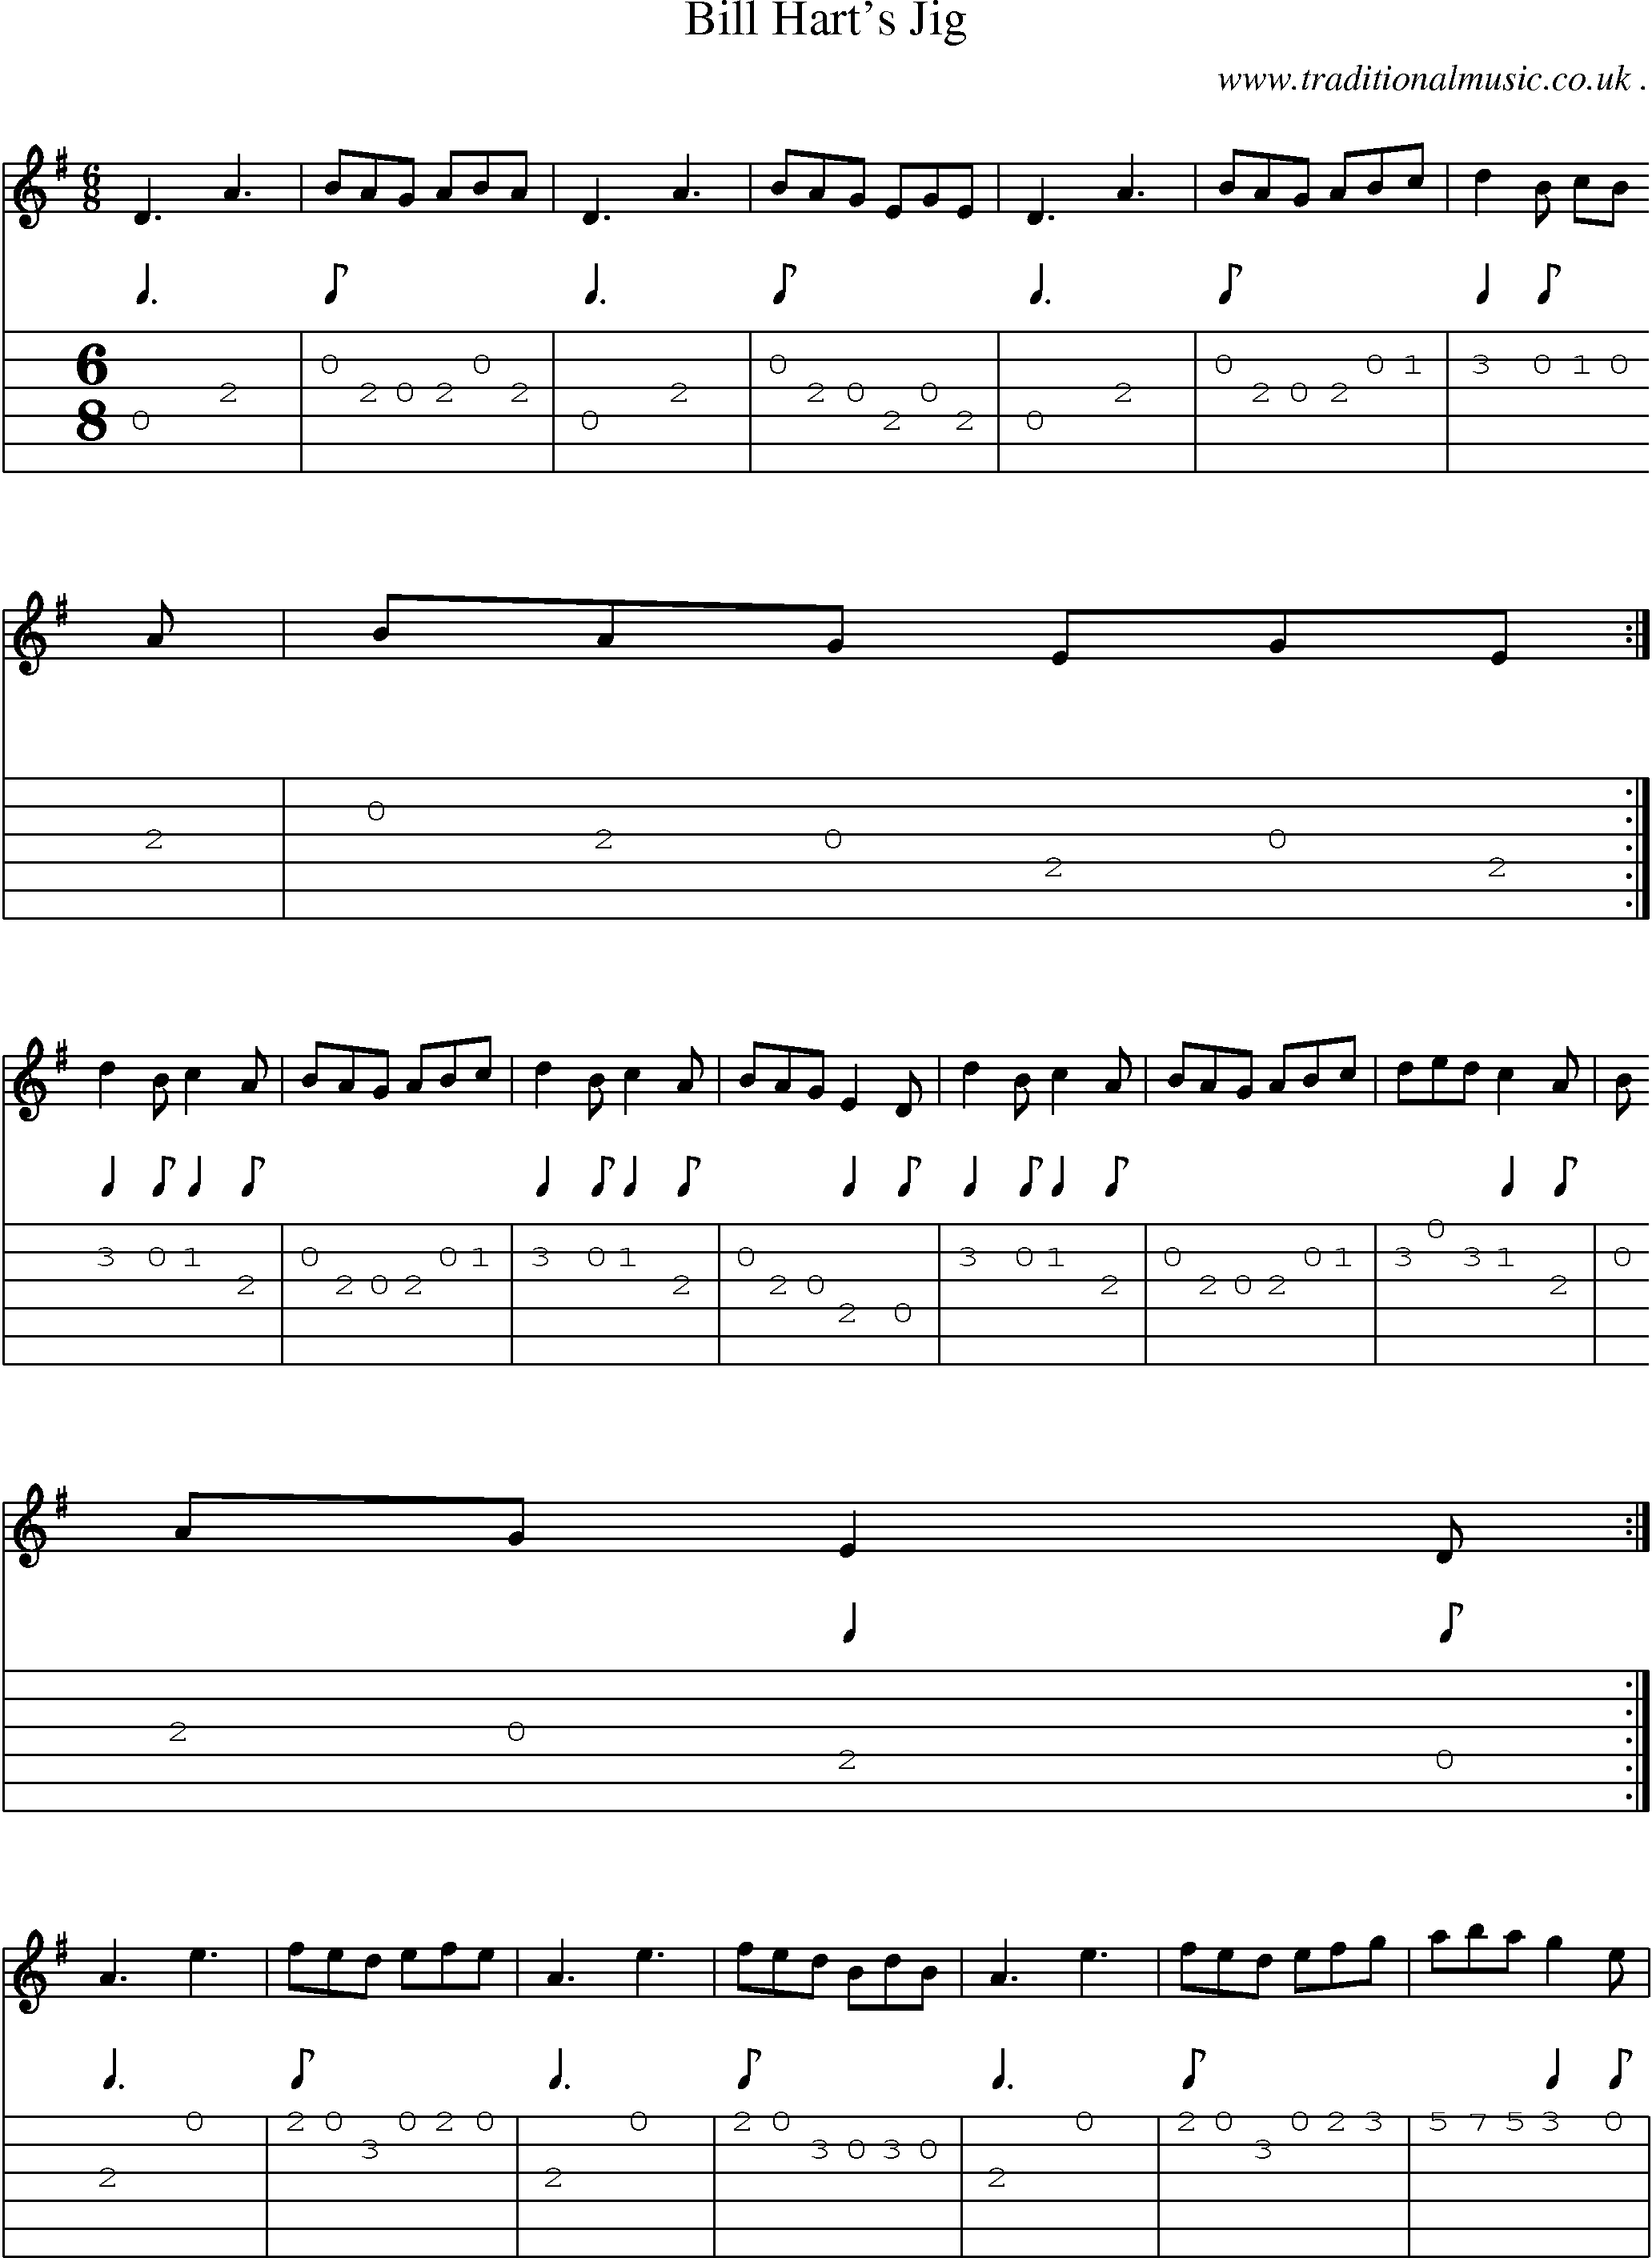 Sheet-Music and Guitar Tabs for Bill Harts Jig